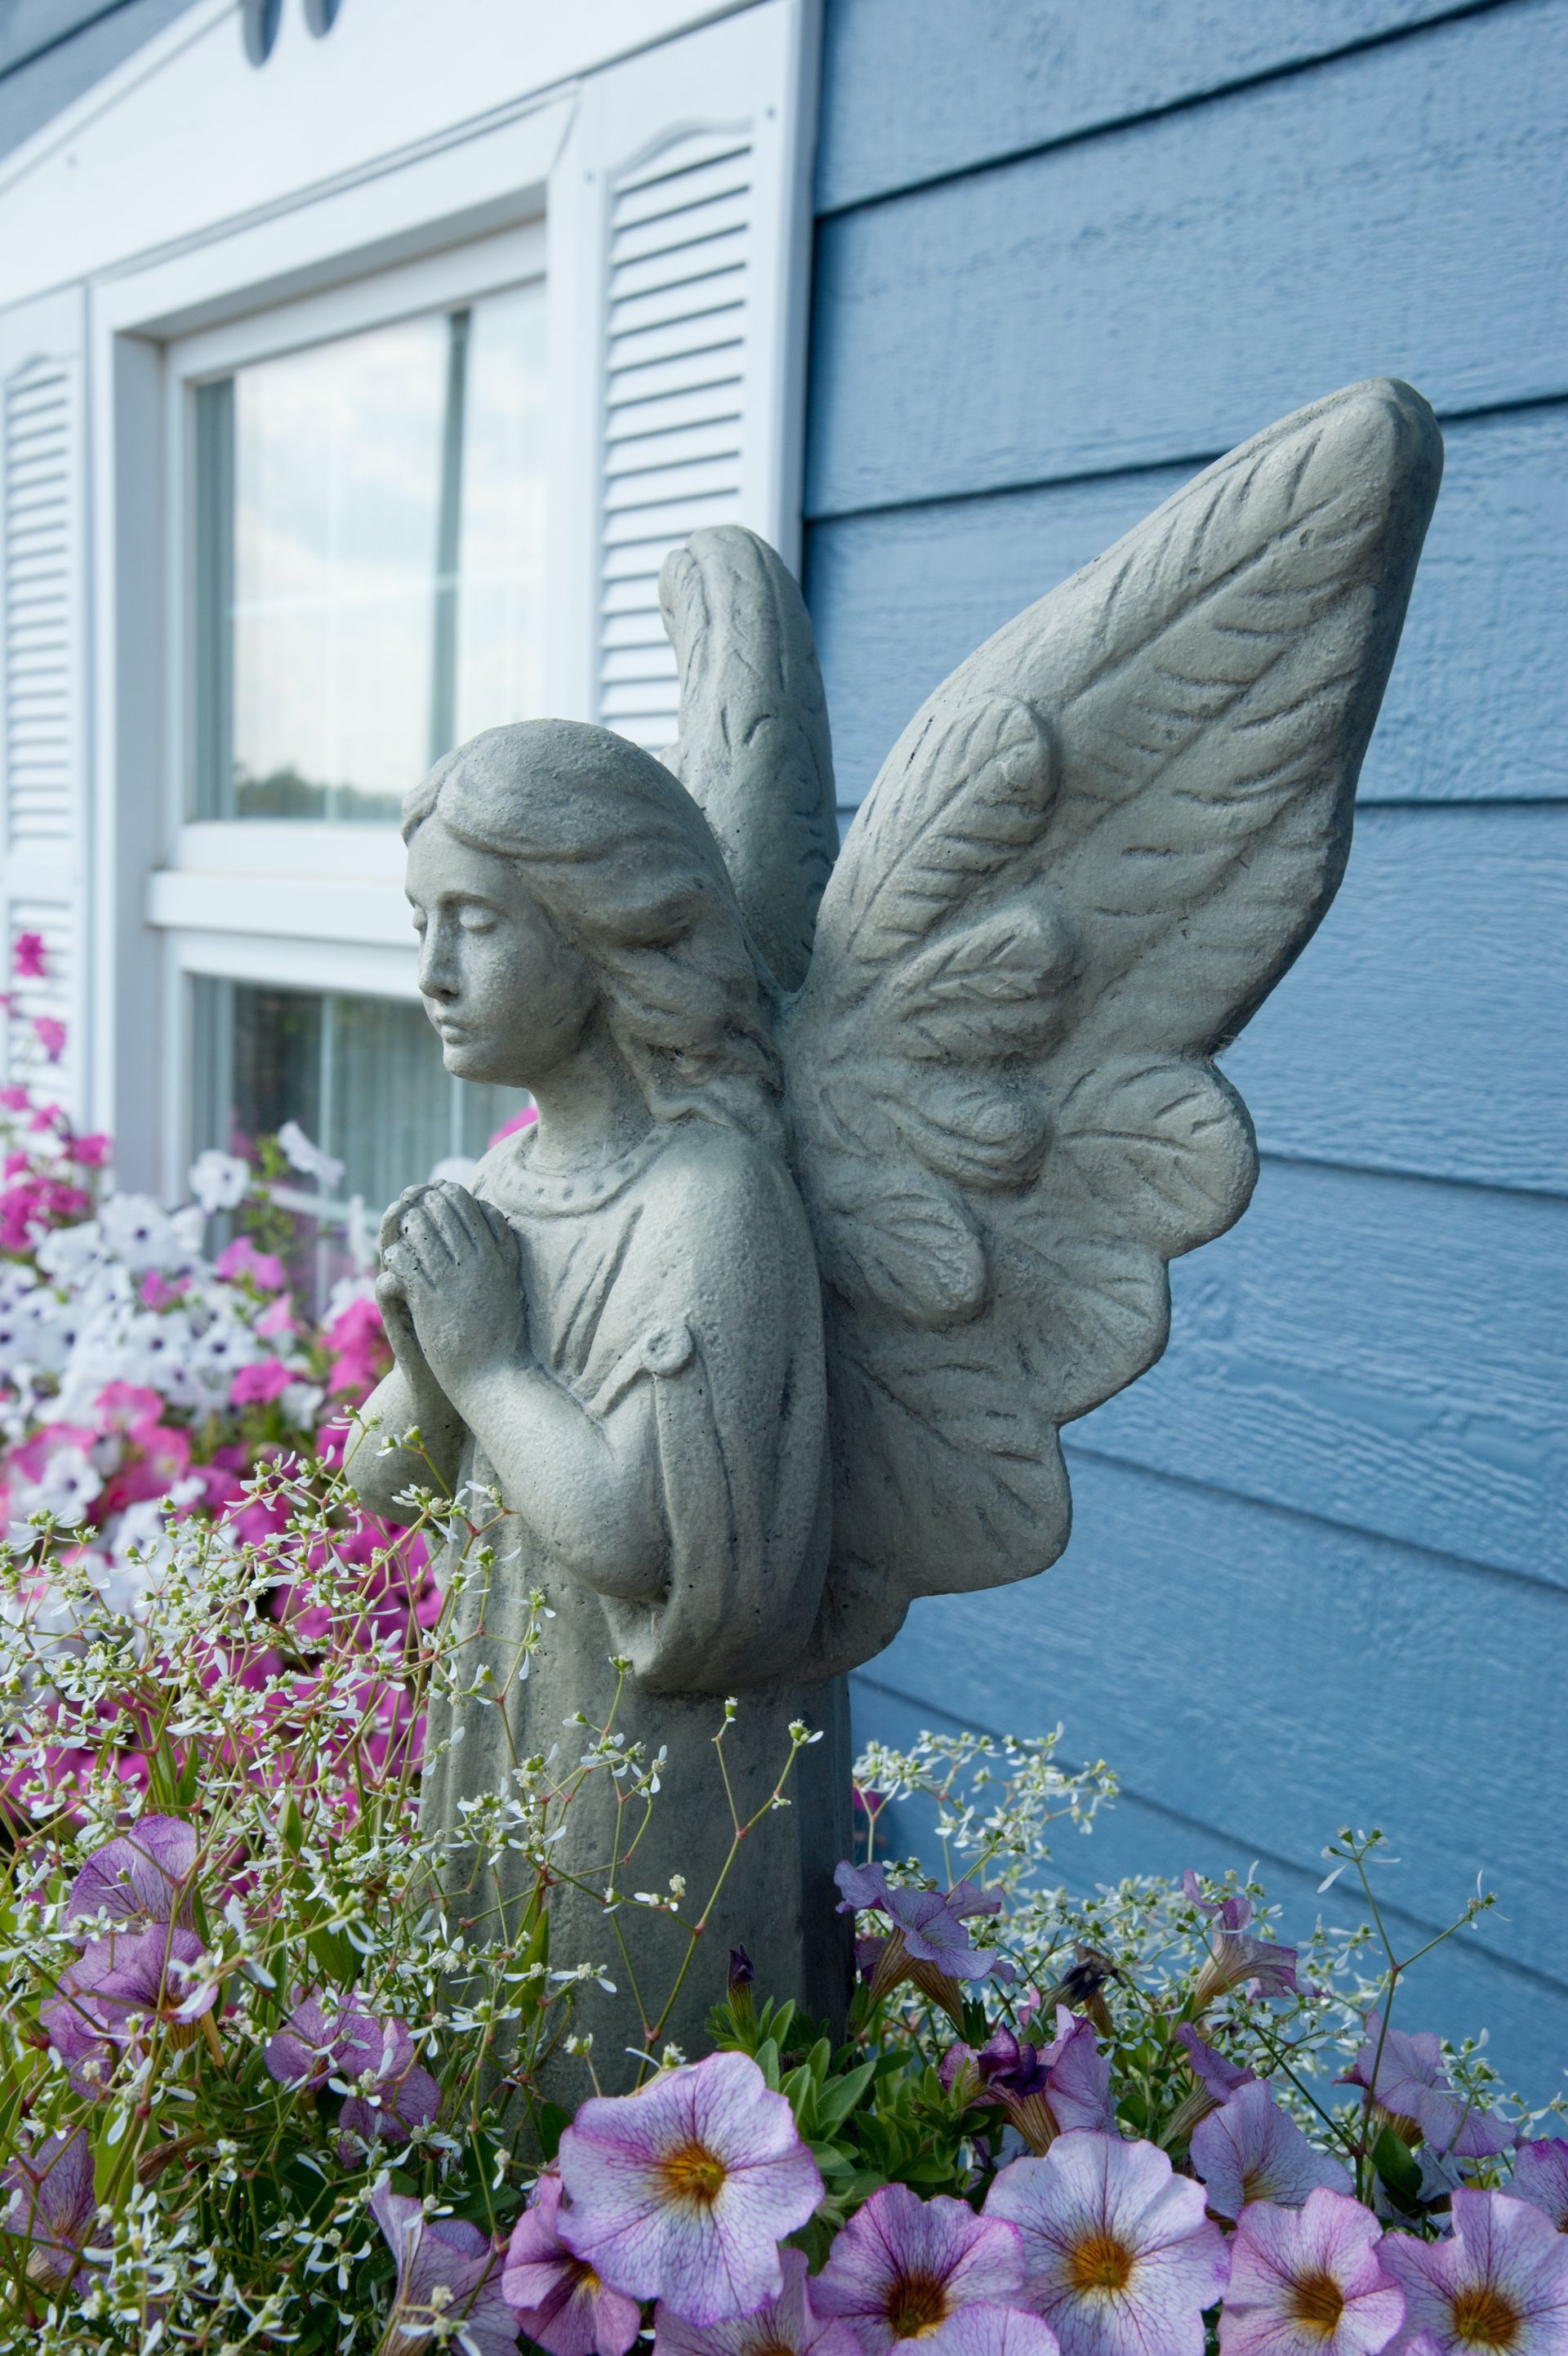 a statue of an angel praying in front of a blue house